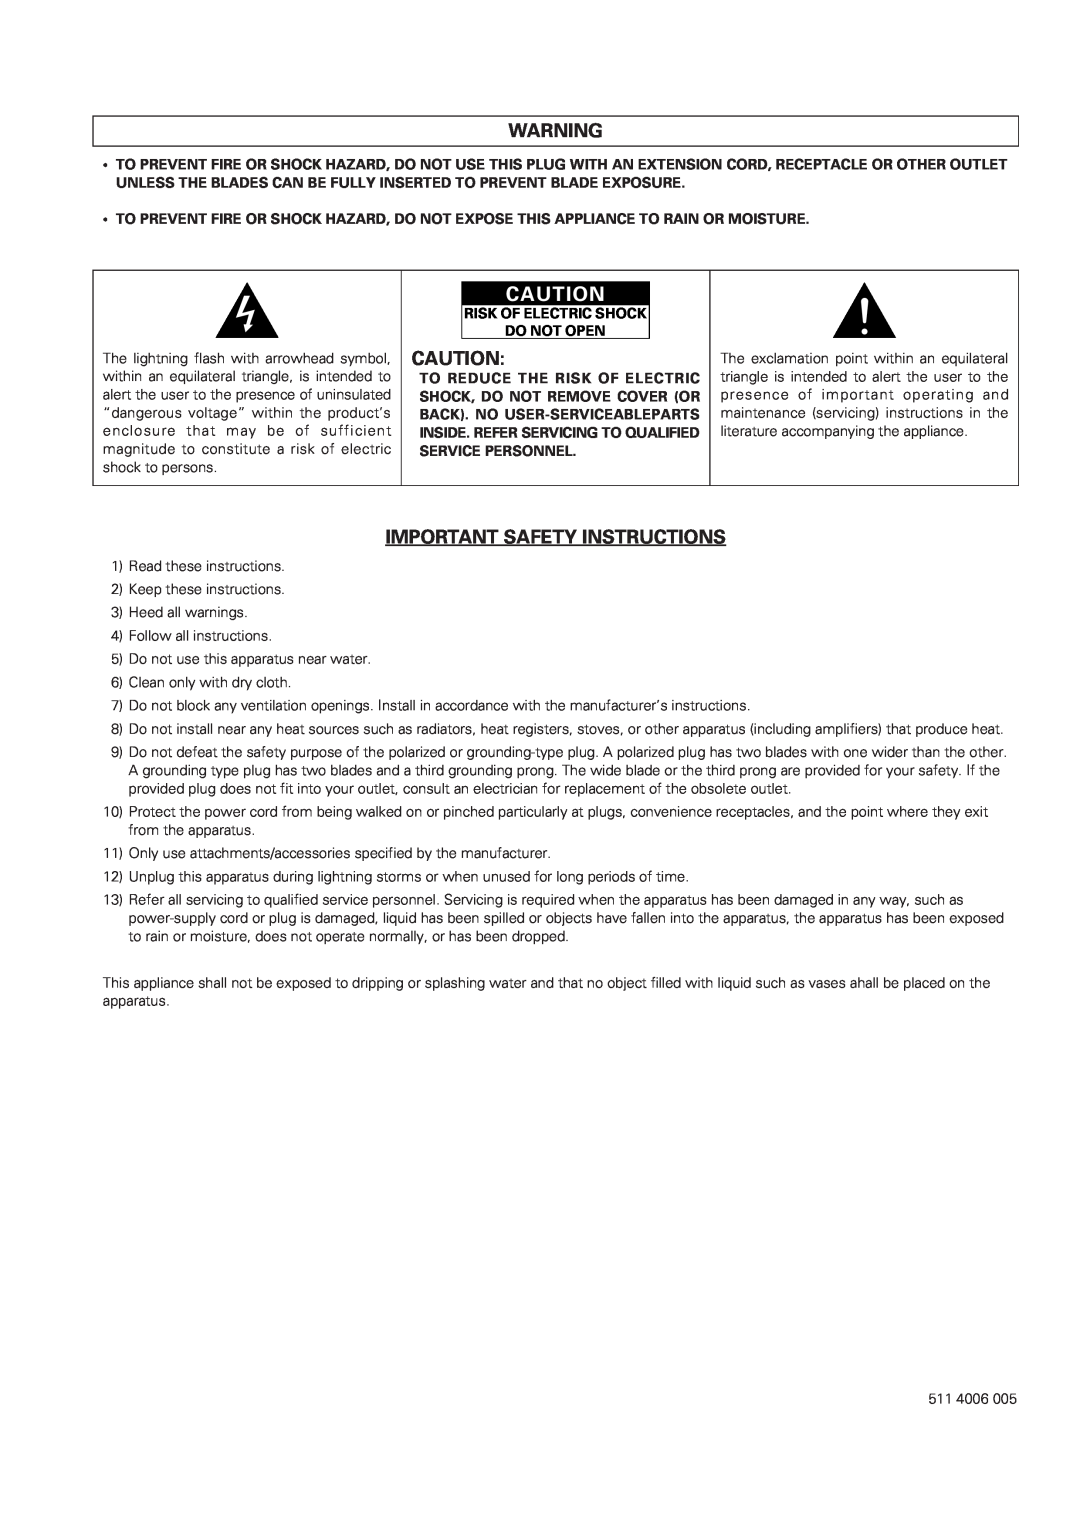 Denon DCM-280 operating instructions Important Safety Instructions, Risk Of Electric Shock Do Not Open 